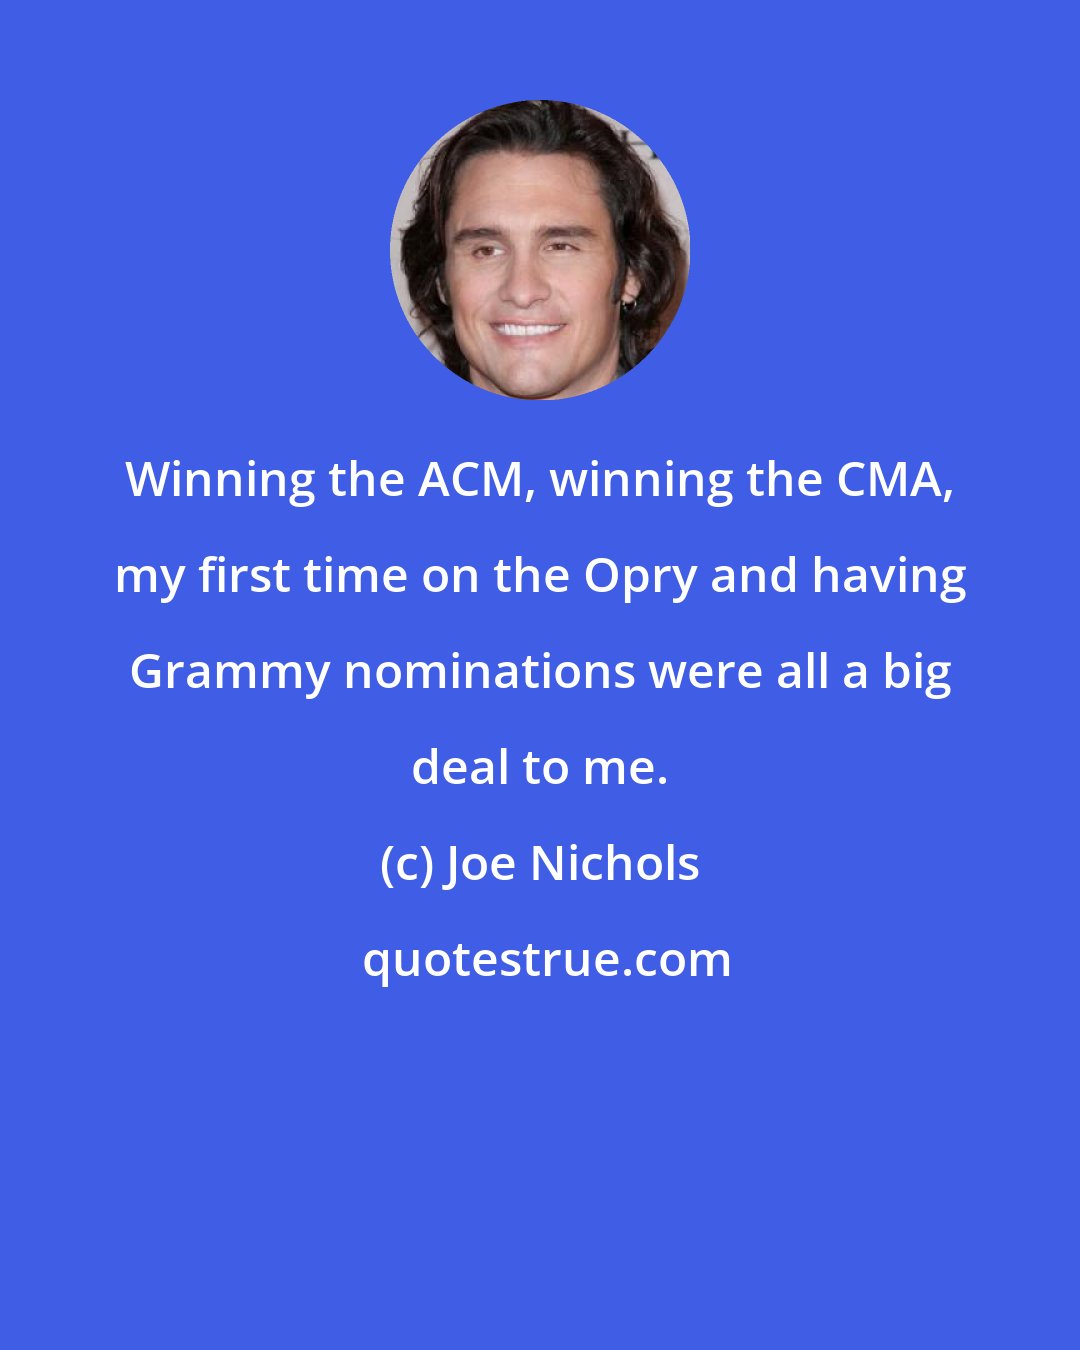 Joe Nichols: Winning the ACM, winning the CMA, my first time on the Opry and having Grammy nominations were all a big deal to me.